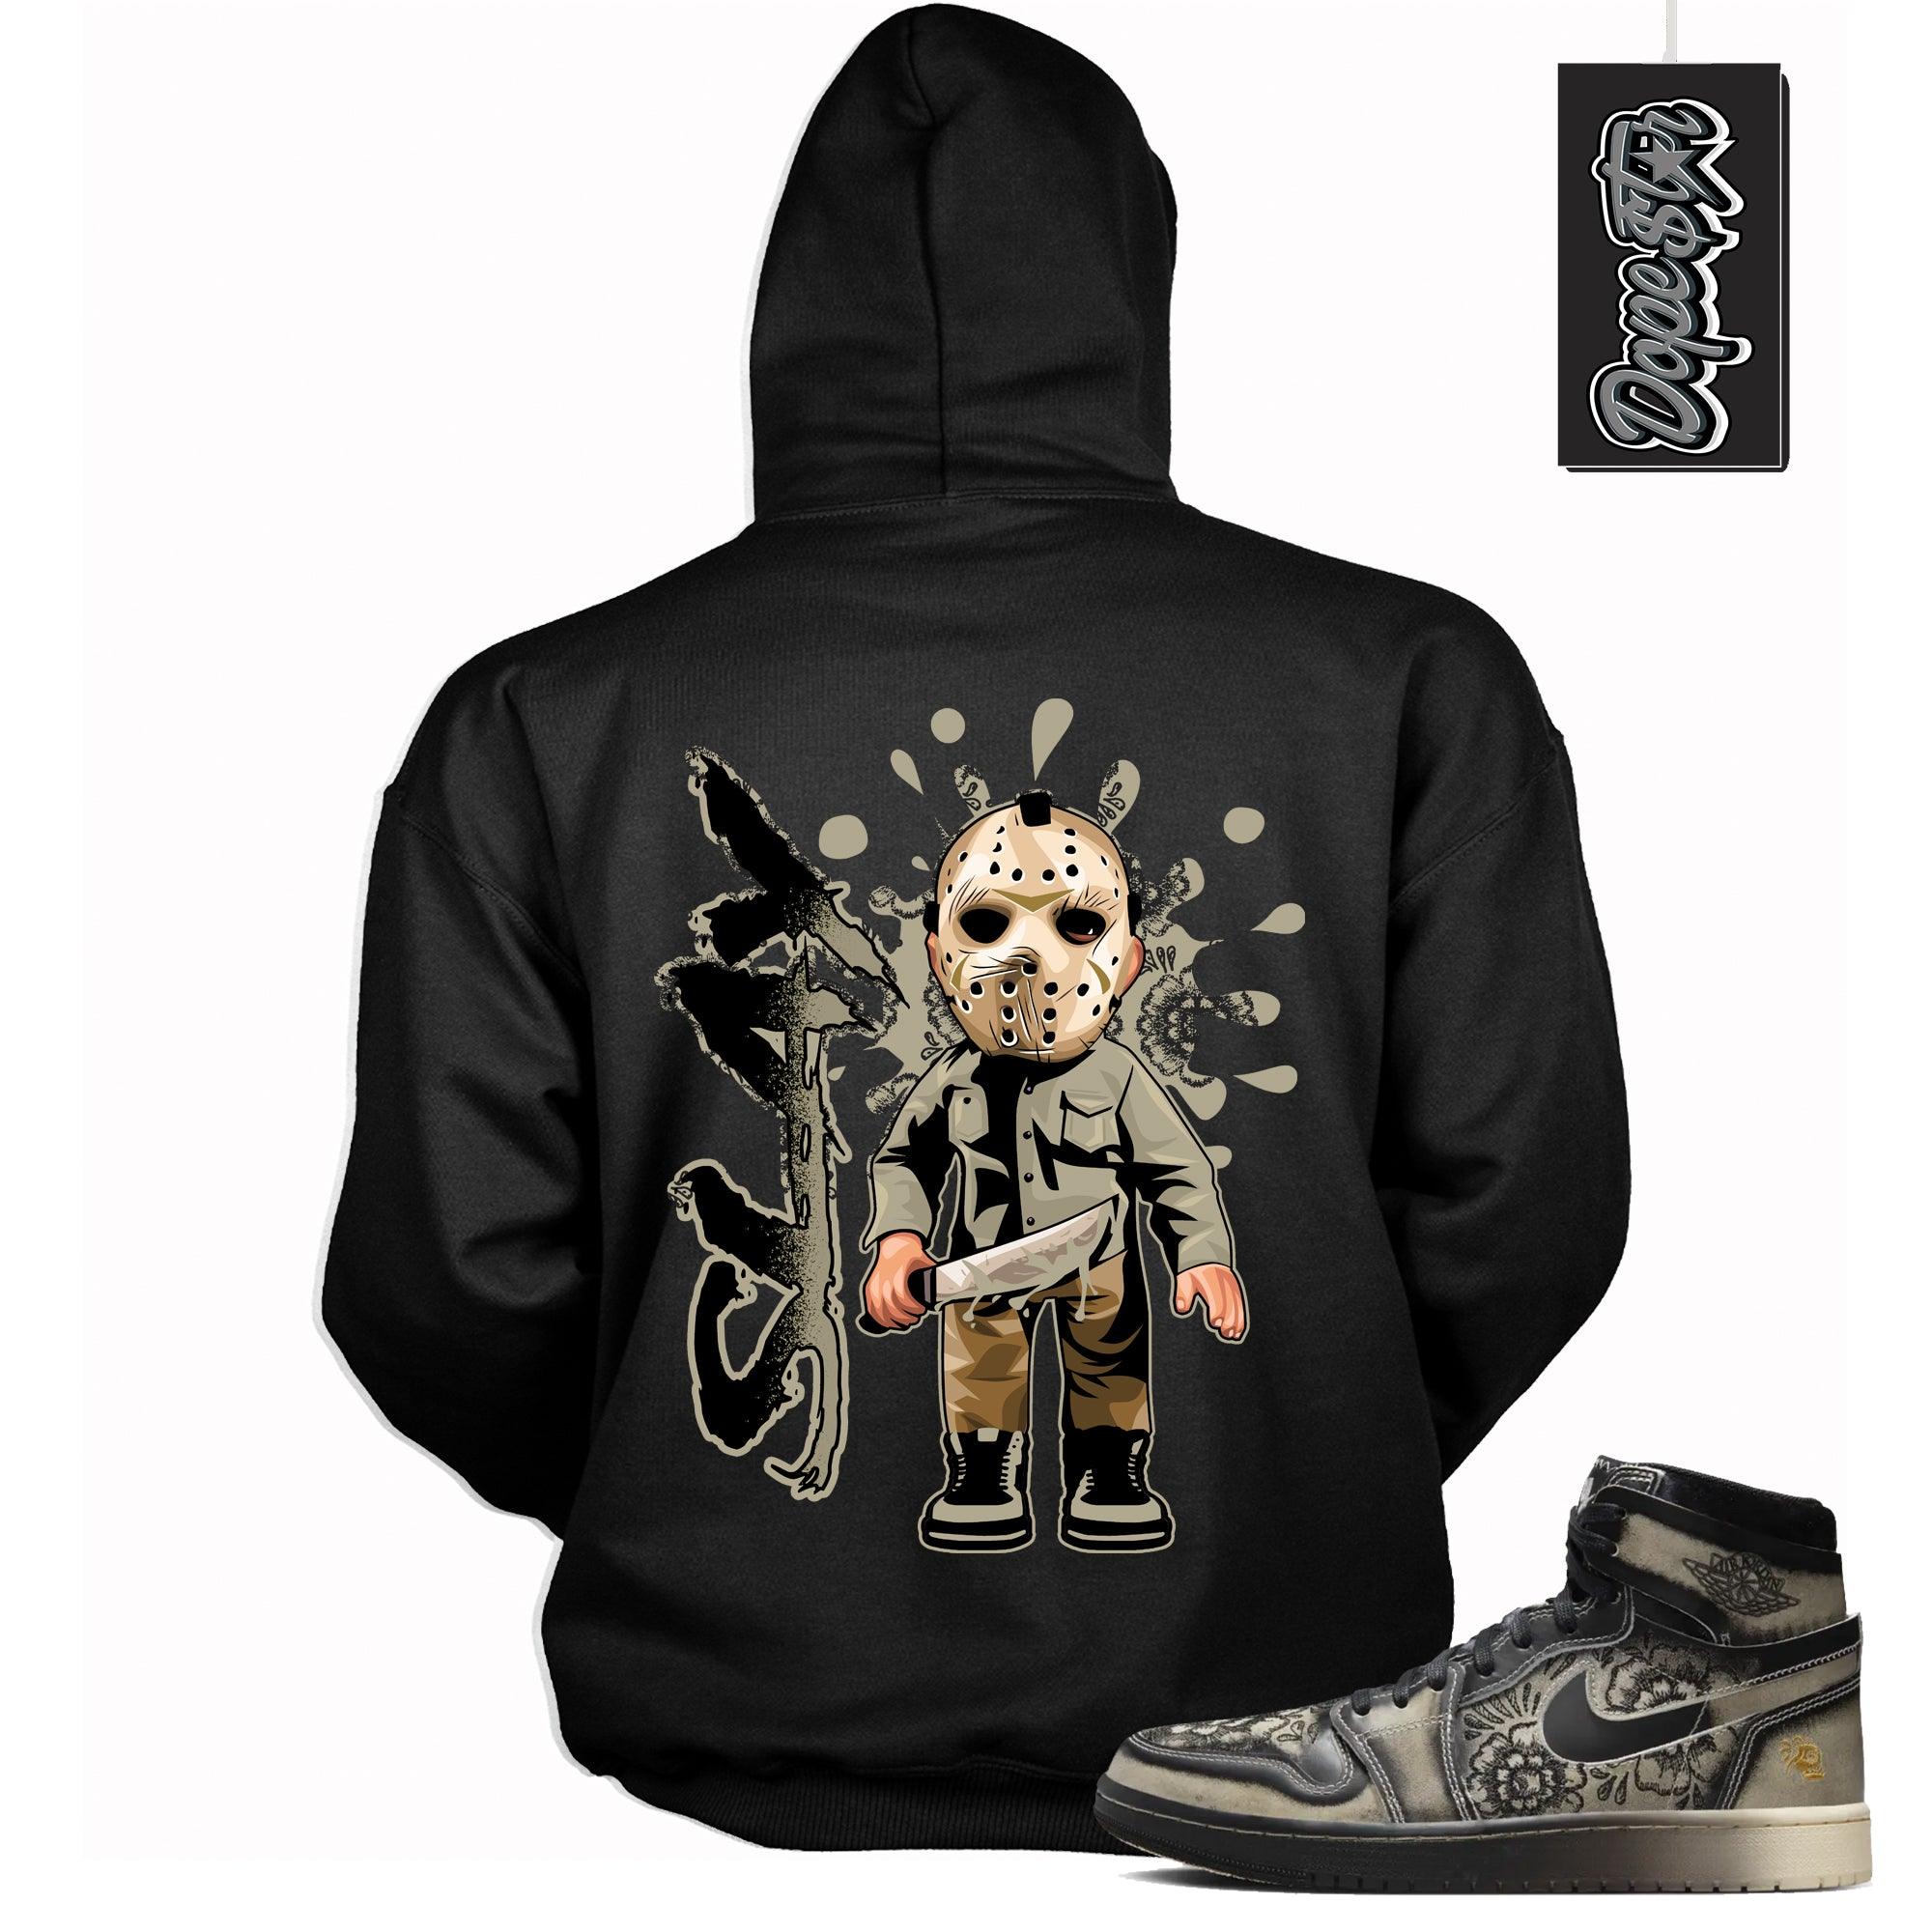 Cool Black Graphic Hoodie with “ SLAY“ print, that perfectly matches Air Jordan 1 High Zoom Comfort 2 Dia de Muertos Black and Pale Ivory sneakers